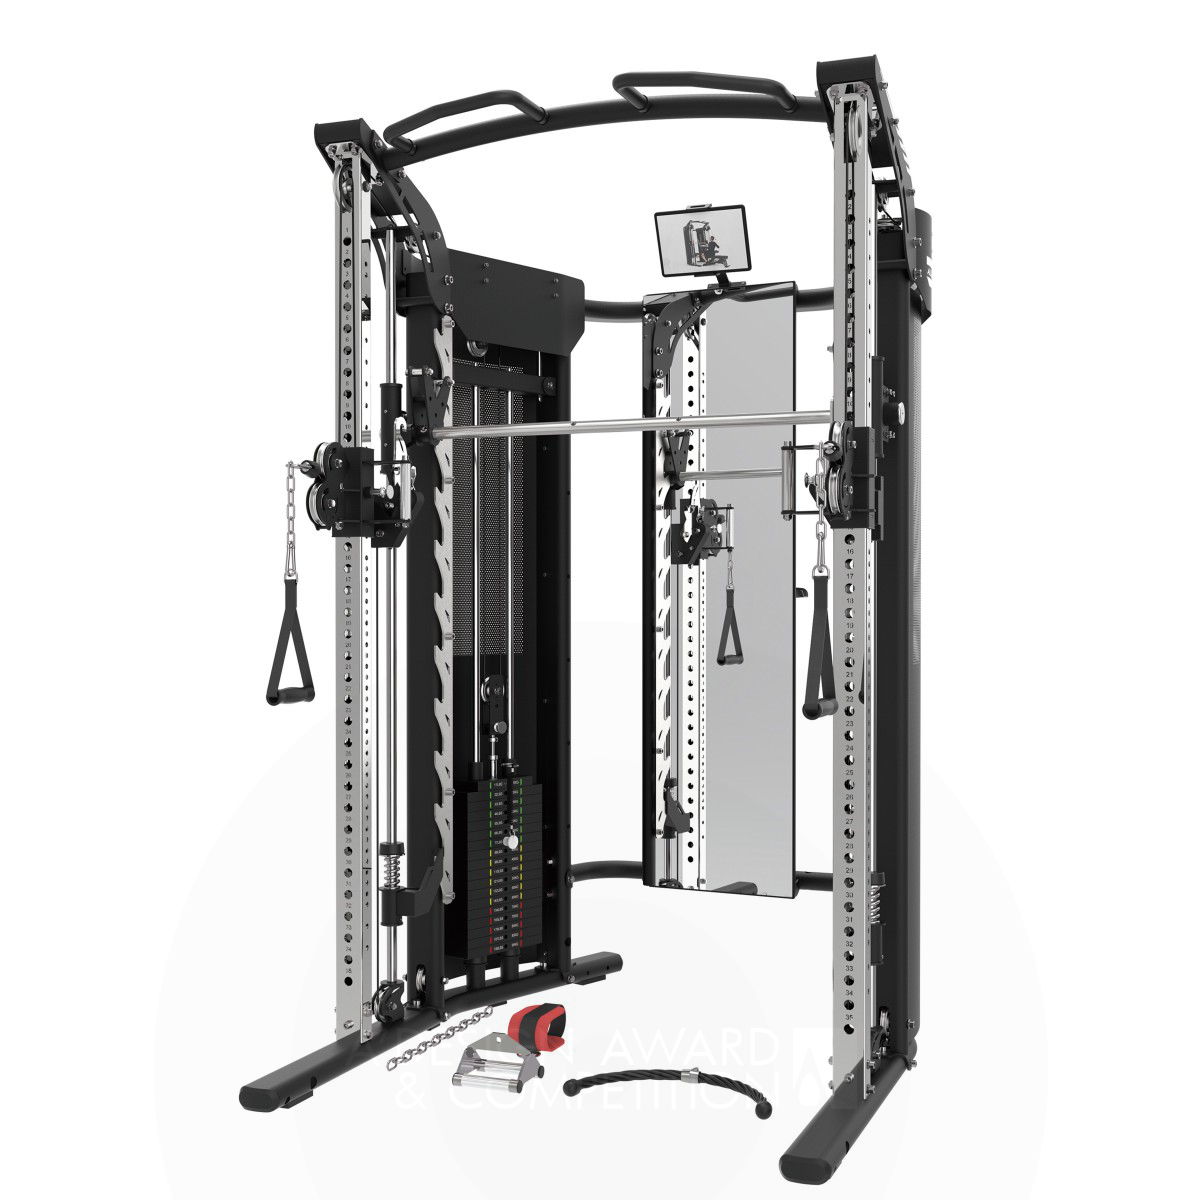 Jichun Du wins Silver at the prestigious A' Sporting Goods, Fitness and Recreation Equipment Design Award with IBL-FT900H Ultra Smith Machine.